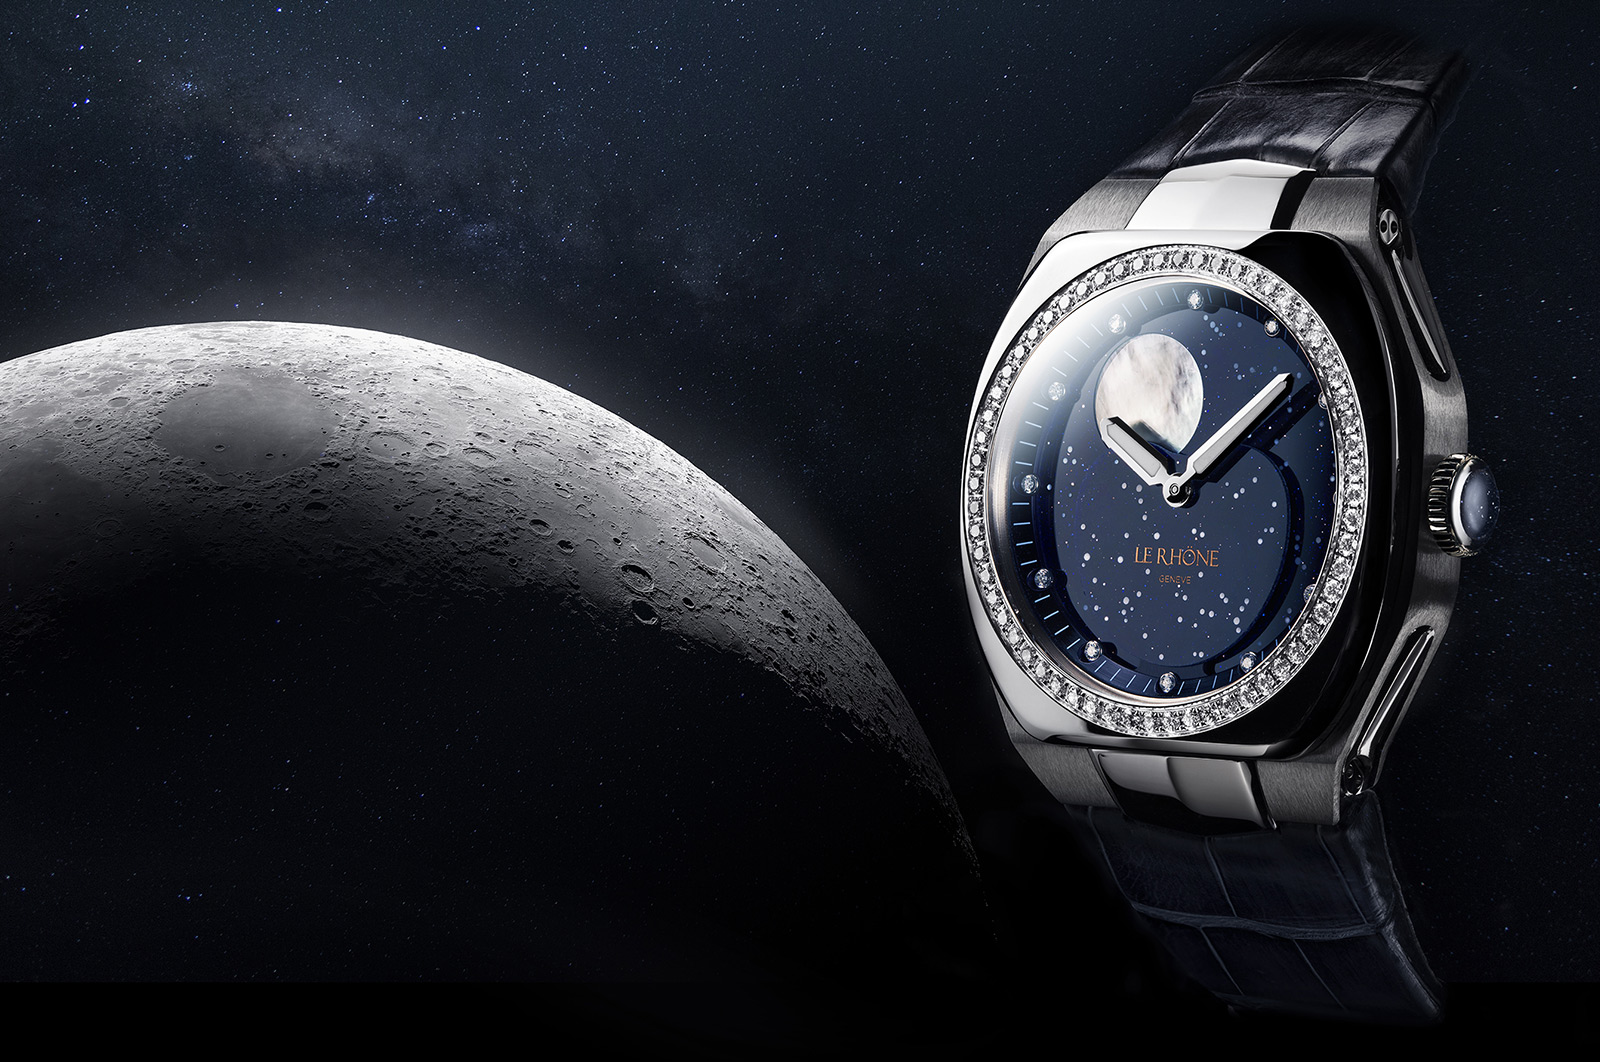 moon-41-le-rhone-watch-action-3